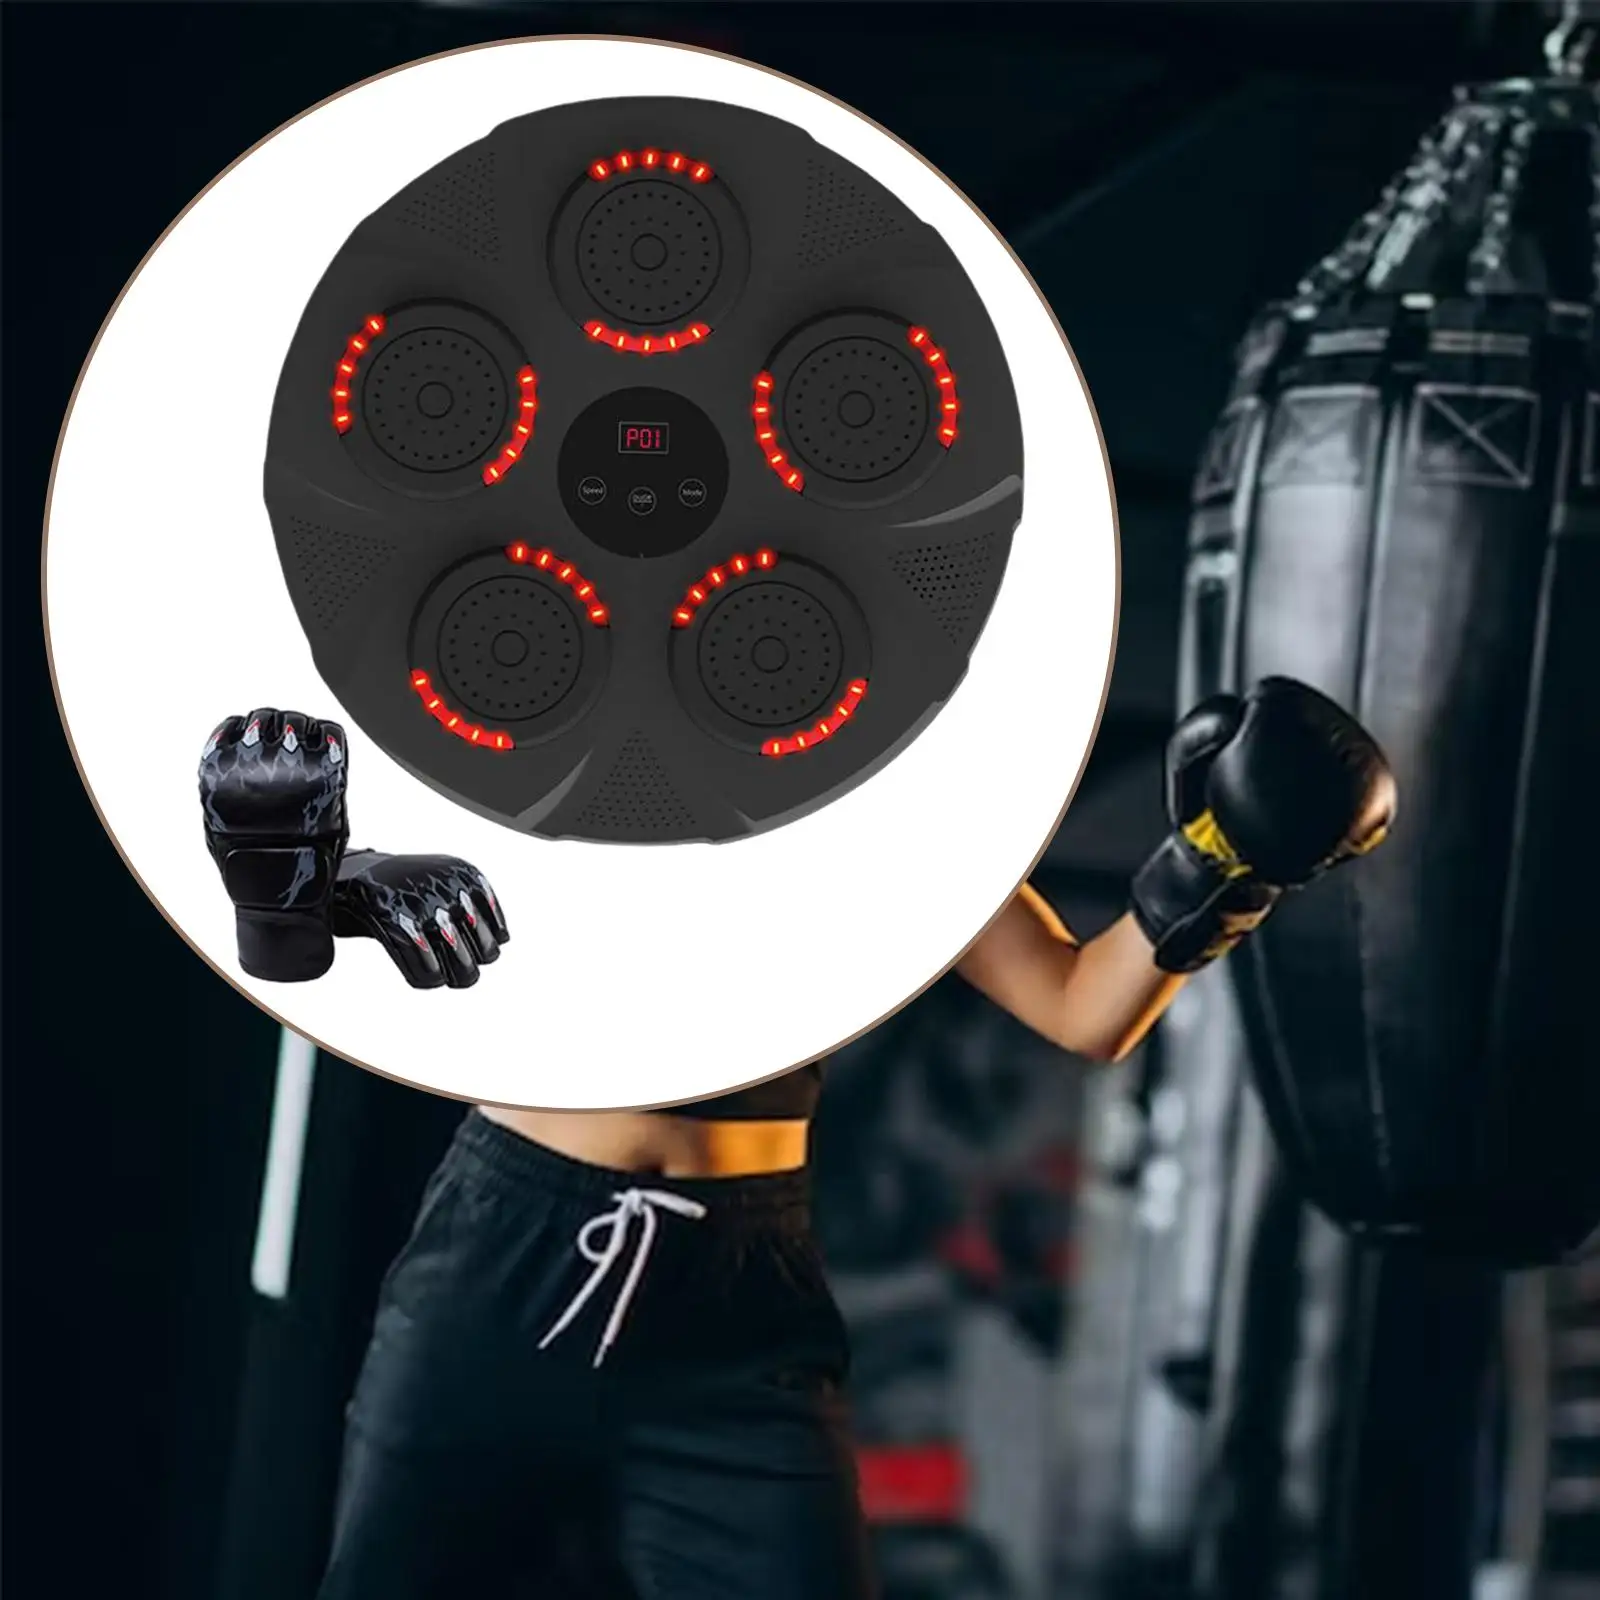 Smart Electronic Wall Target Music Boxing Training Machine, Competitions Game